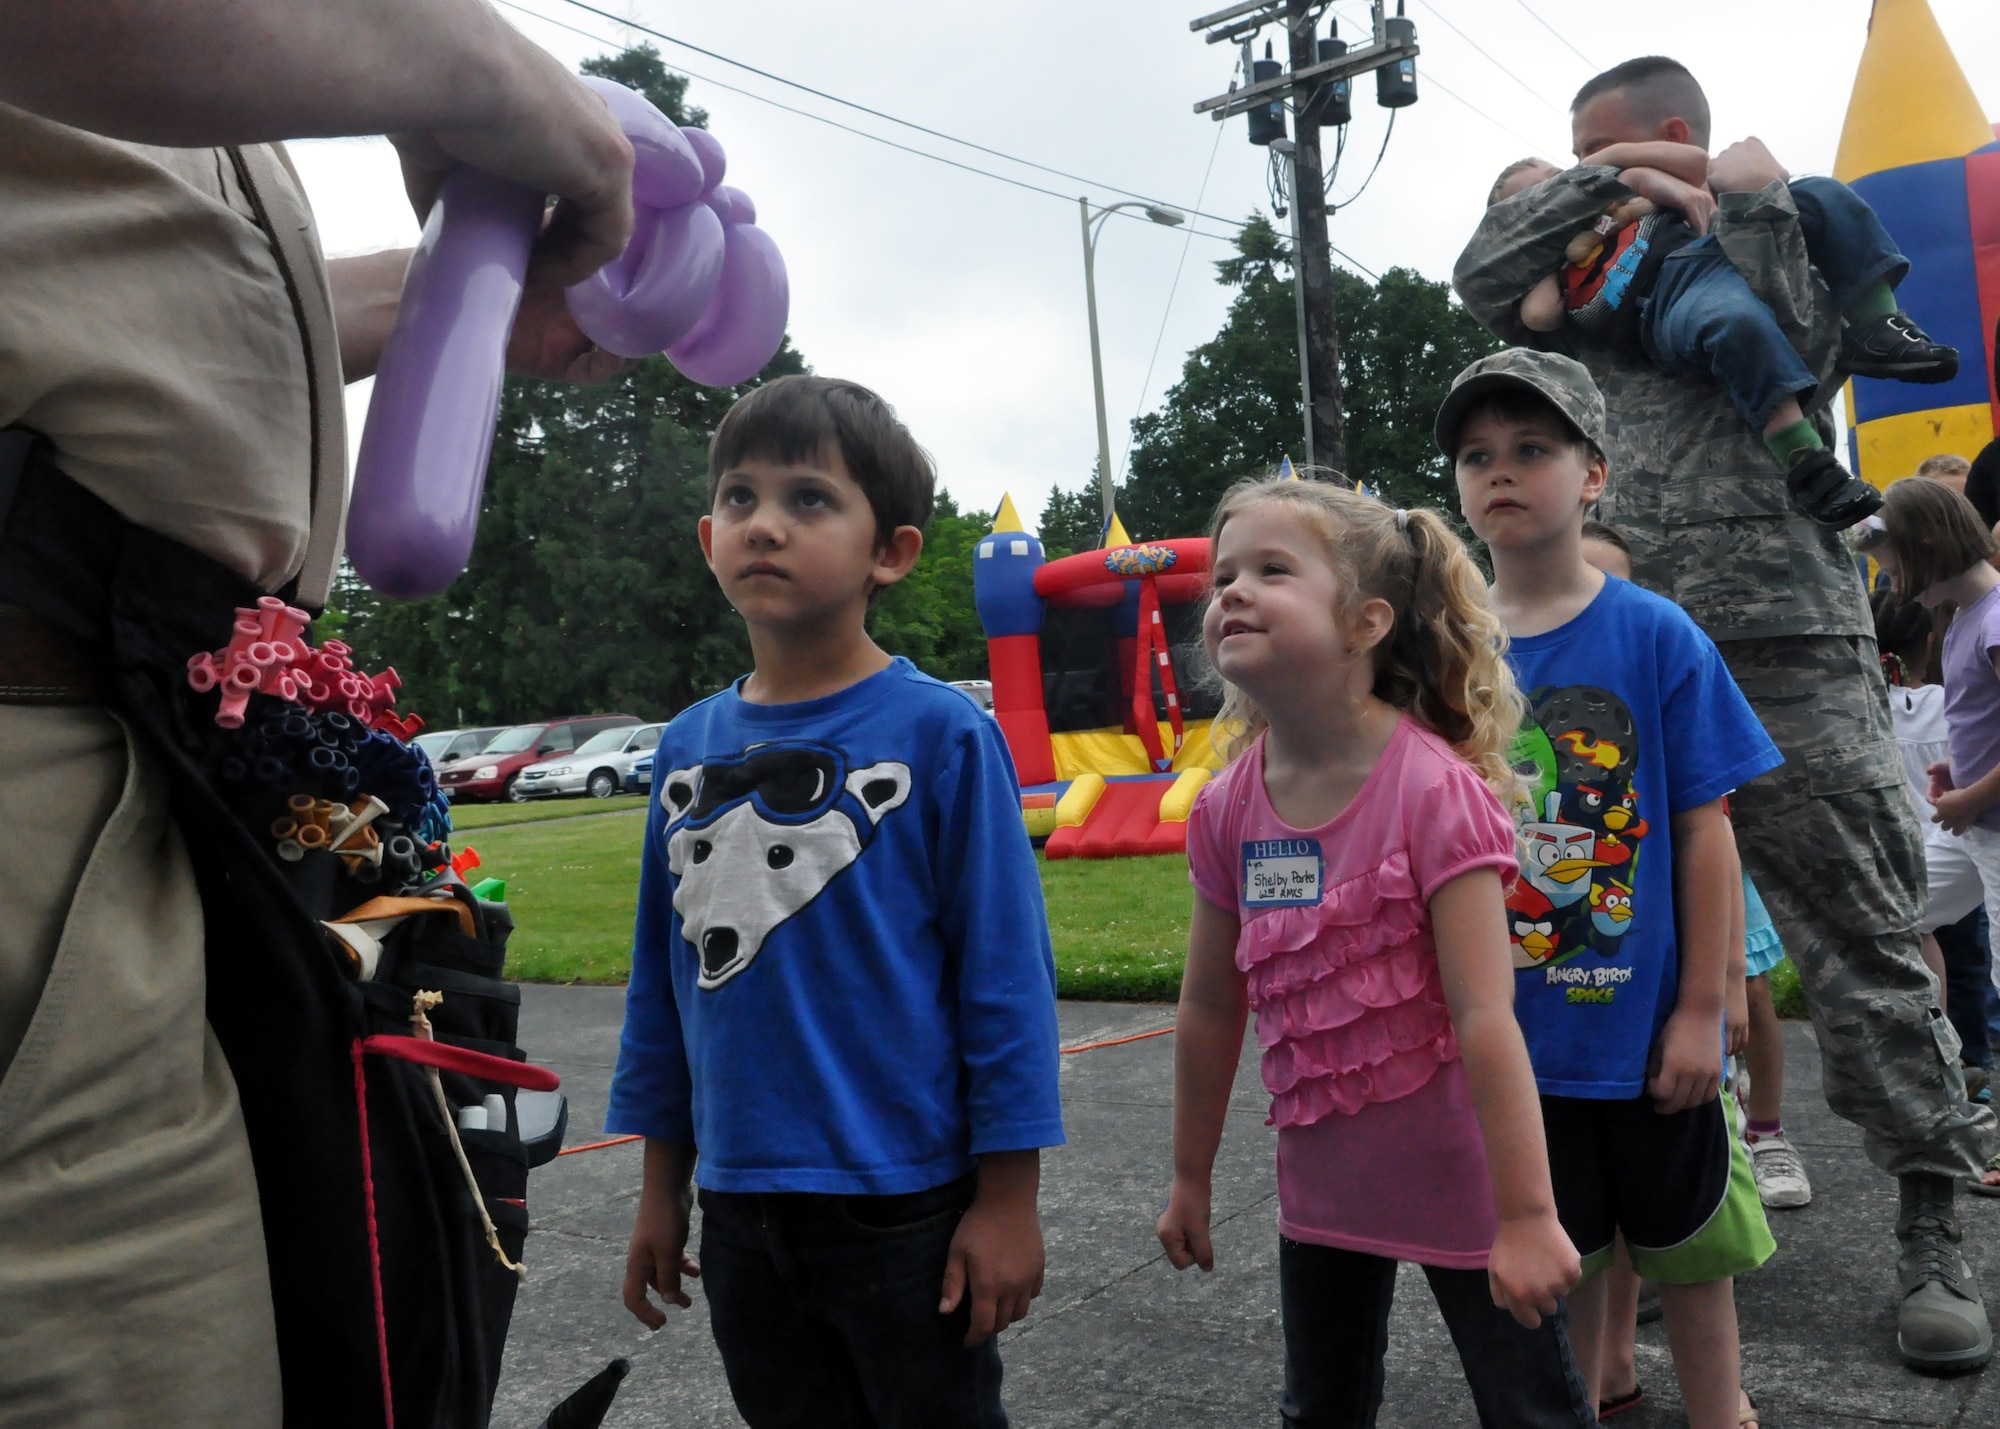 Children wait in line for balloon animals during the quarterly Deployed Families Dinner June 11, 2012, at the McChord Field Chapel Support Center on Joint Base Lewis-McChord, Wash. (U.S. Air Force photo/Senior Airman Leah Young)